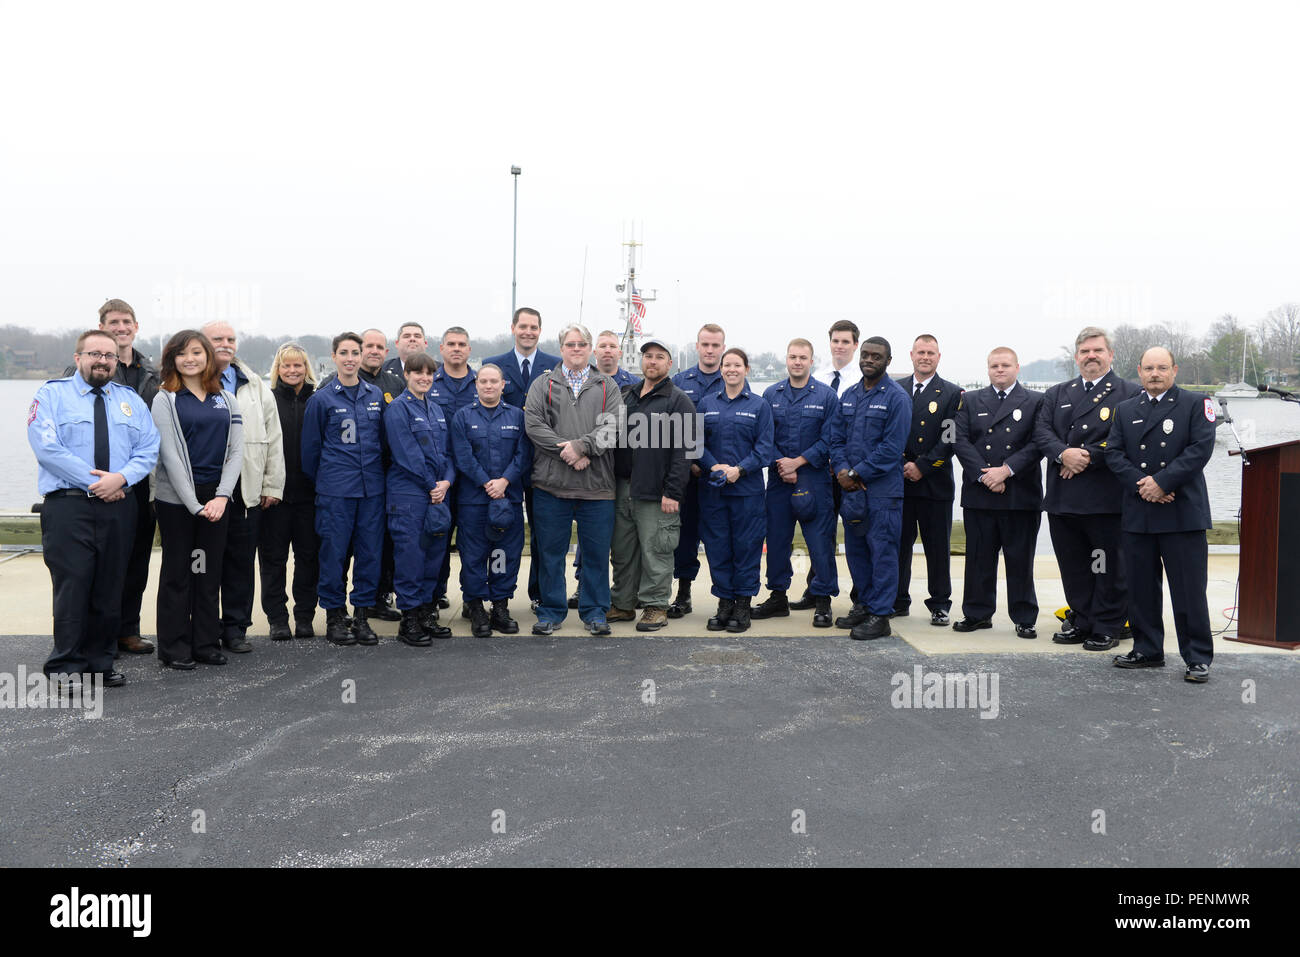 Brad Stemcosky and Charlie Frend, survivors of a capsized vessel incident, pose for a photo after a news conference reuniting them with their rescuers at Coast Guard Station Annapolis, Md., Wednesday, Dec. 30, 2015. The agencies involved were the U.S. Coast Guard, Maryland Natural Resources Police, Maryland State Police and Saint Mary's County. (U.S. Coast Guard photo by Petty Officer 3rd Class Jasmine Mieszala) Stock Photo